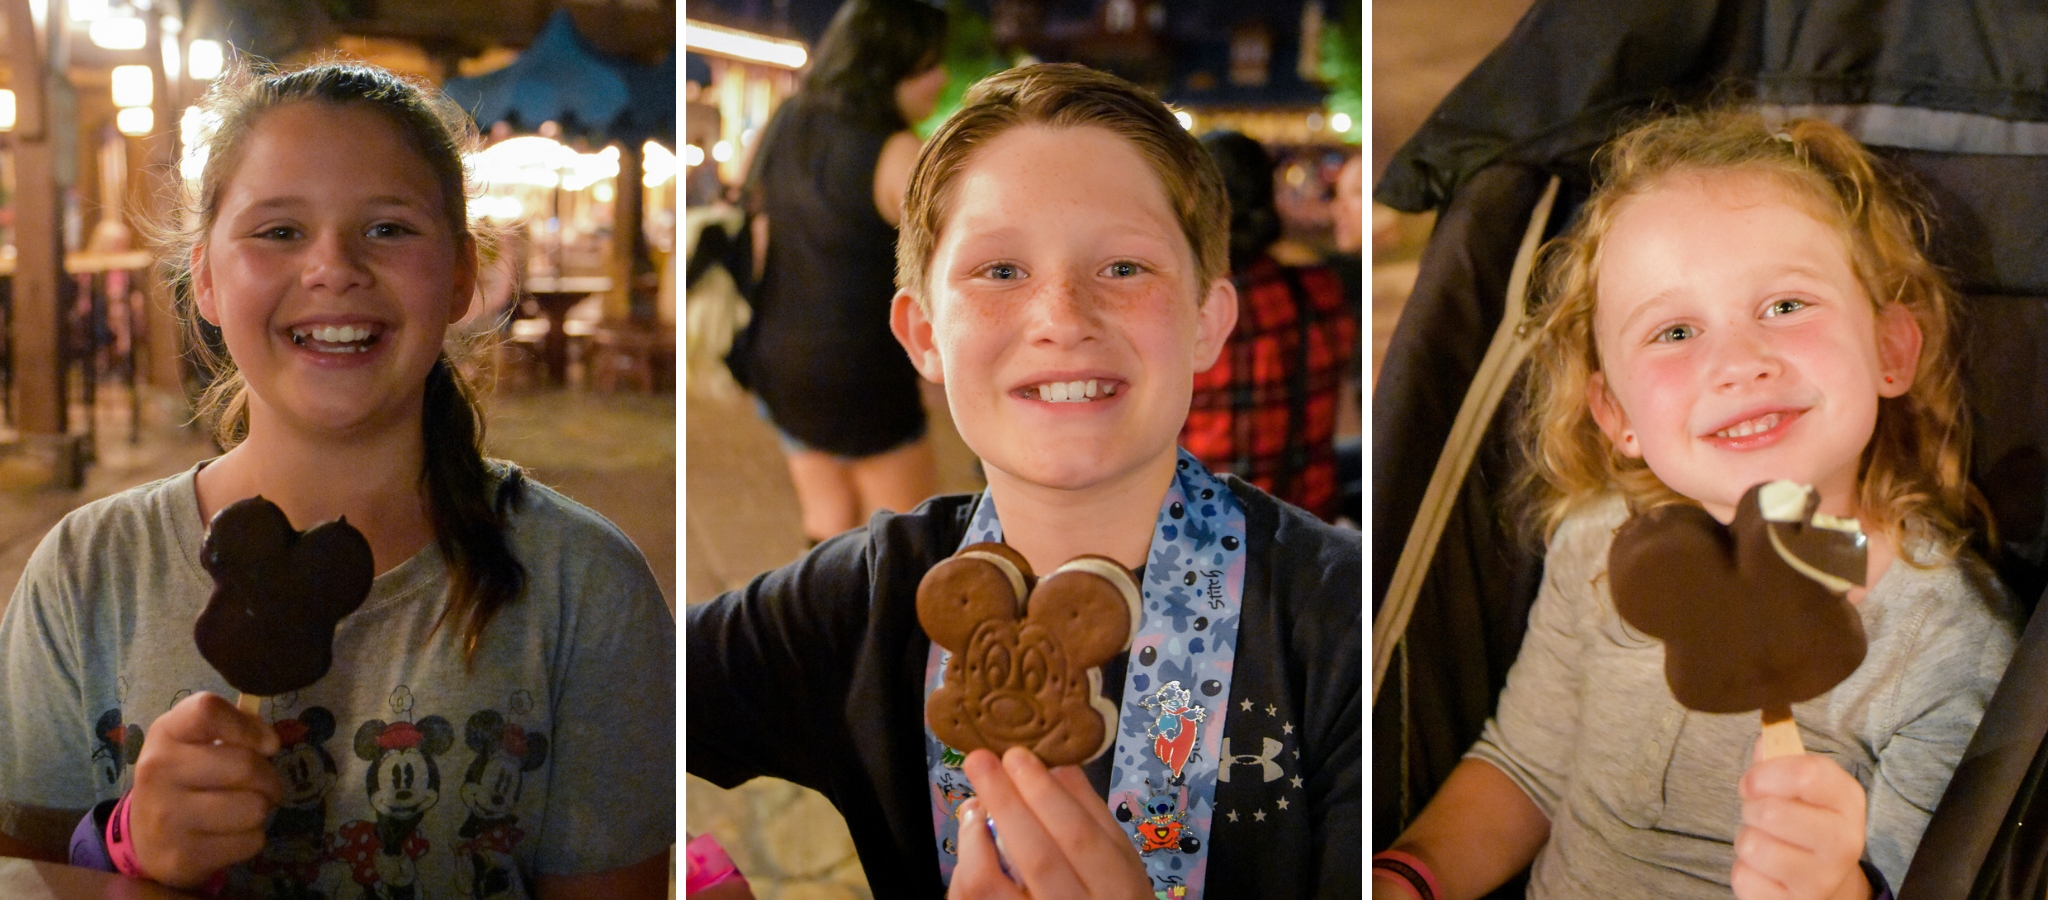 Unlimited Mickey premium ice cream bars and ice cream sandwiches during After Hours events